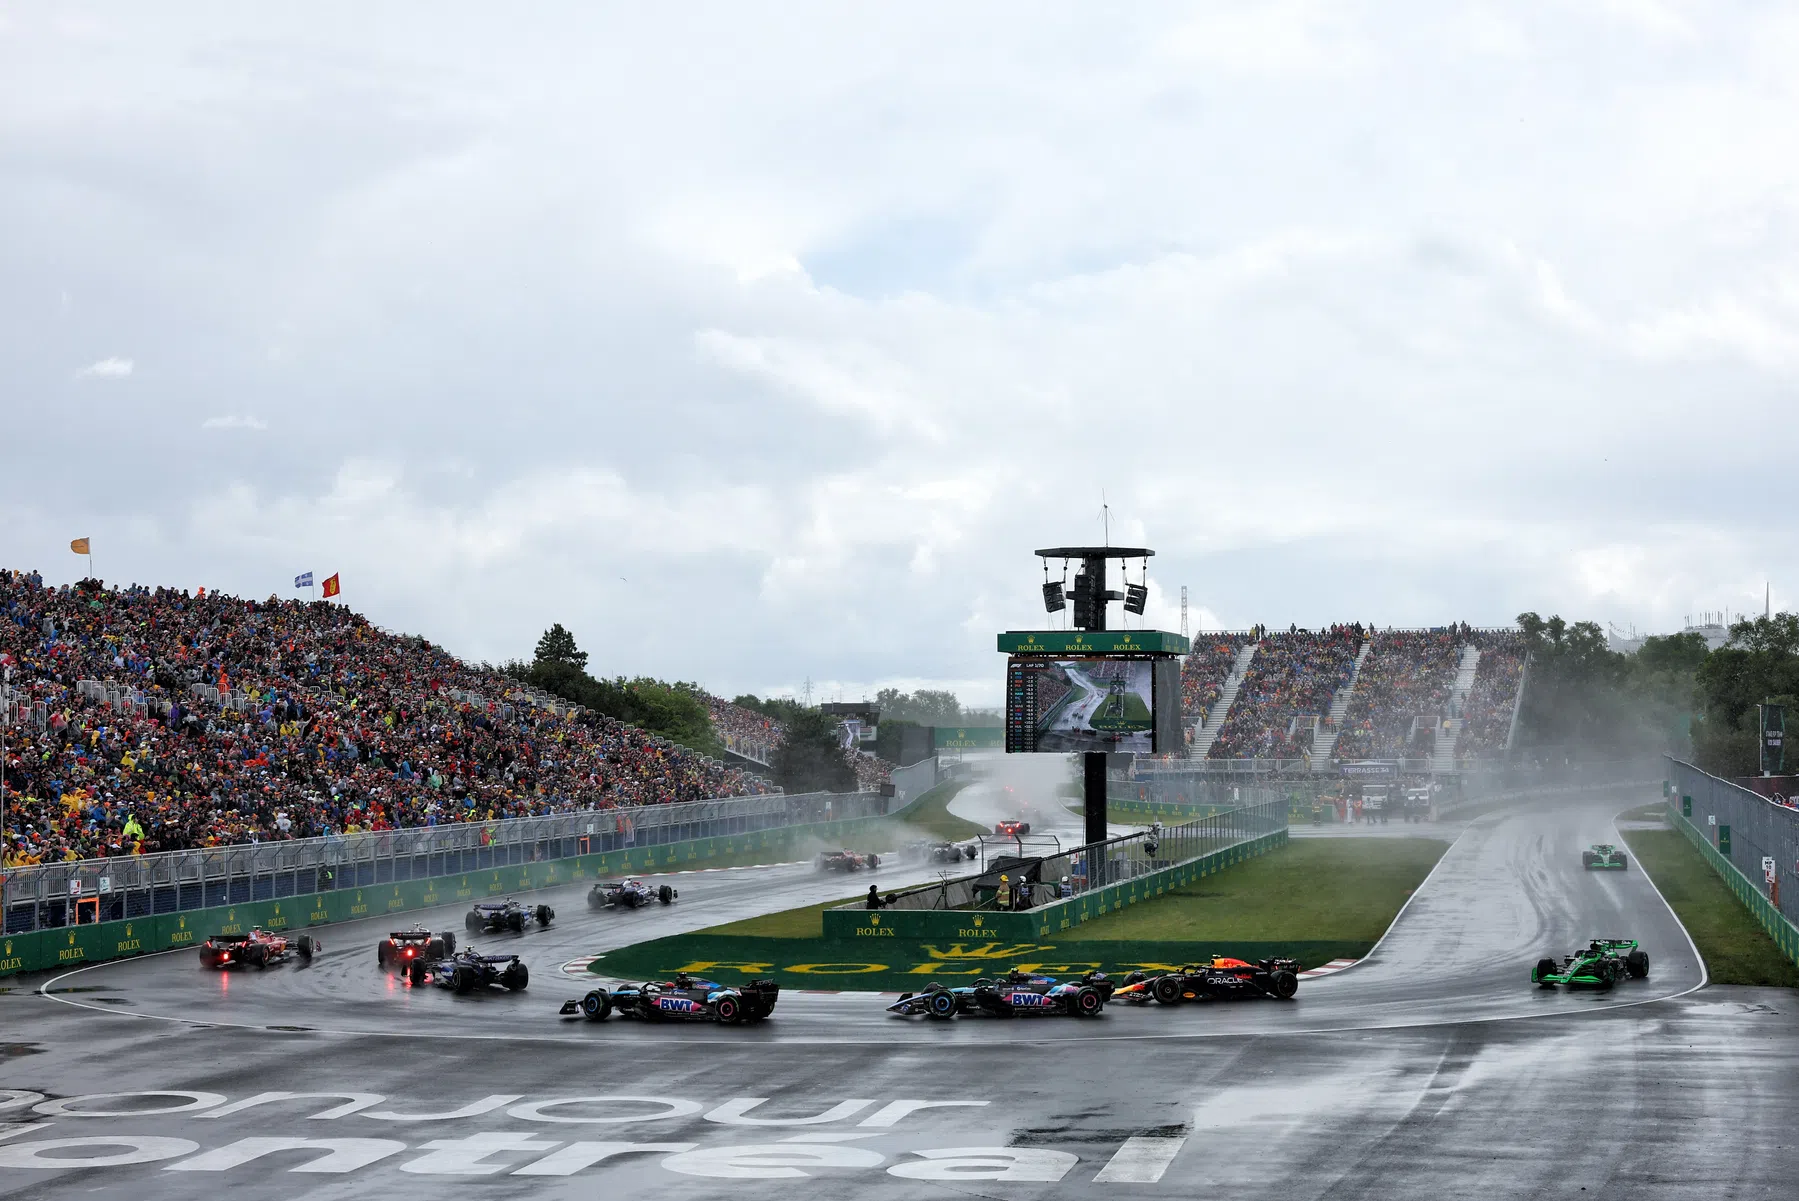 Canadian Grand Prix promoter says a 'serious' contractor review to happen